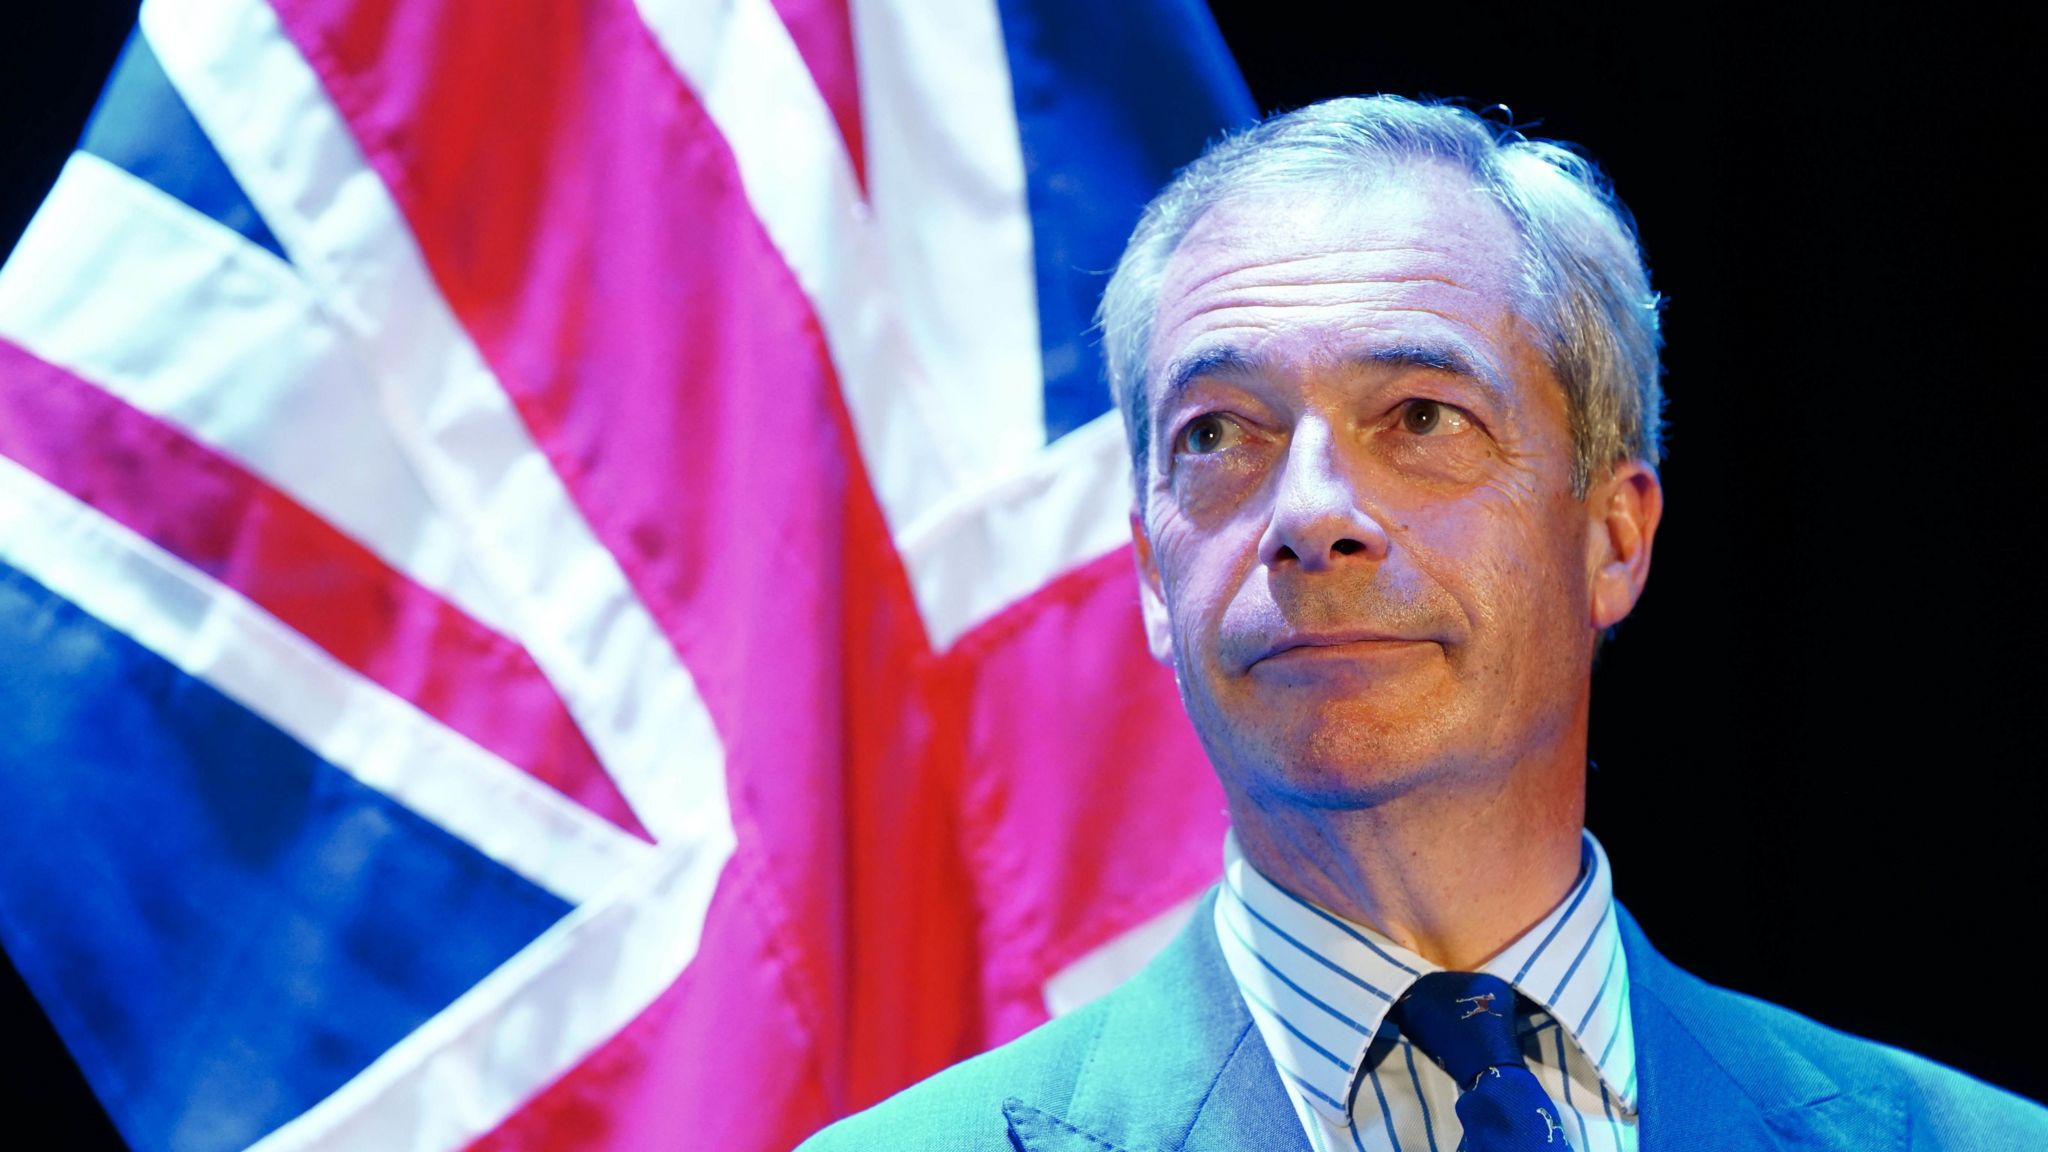 Nigel Farage with the UK flag behind him